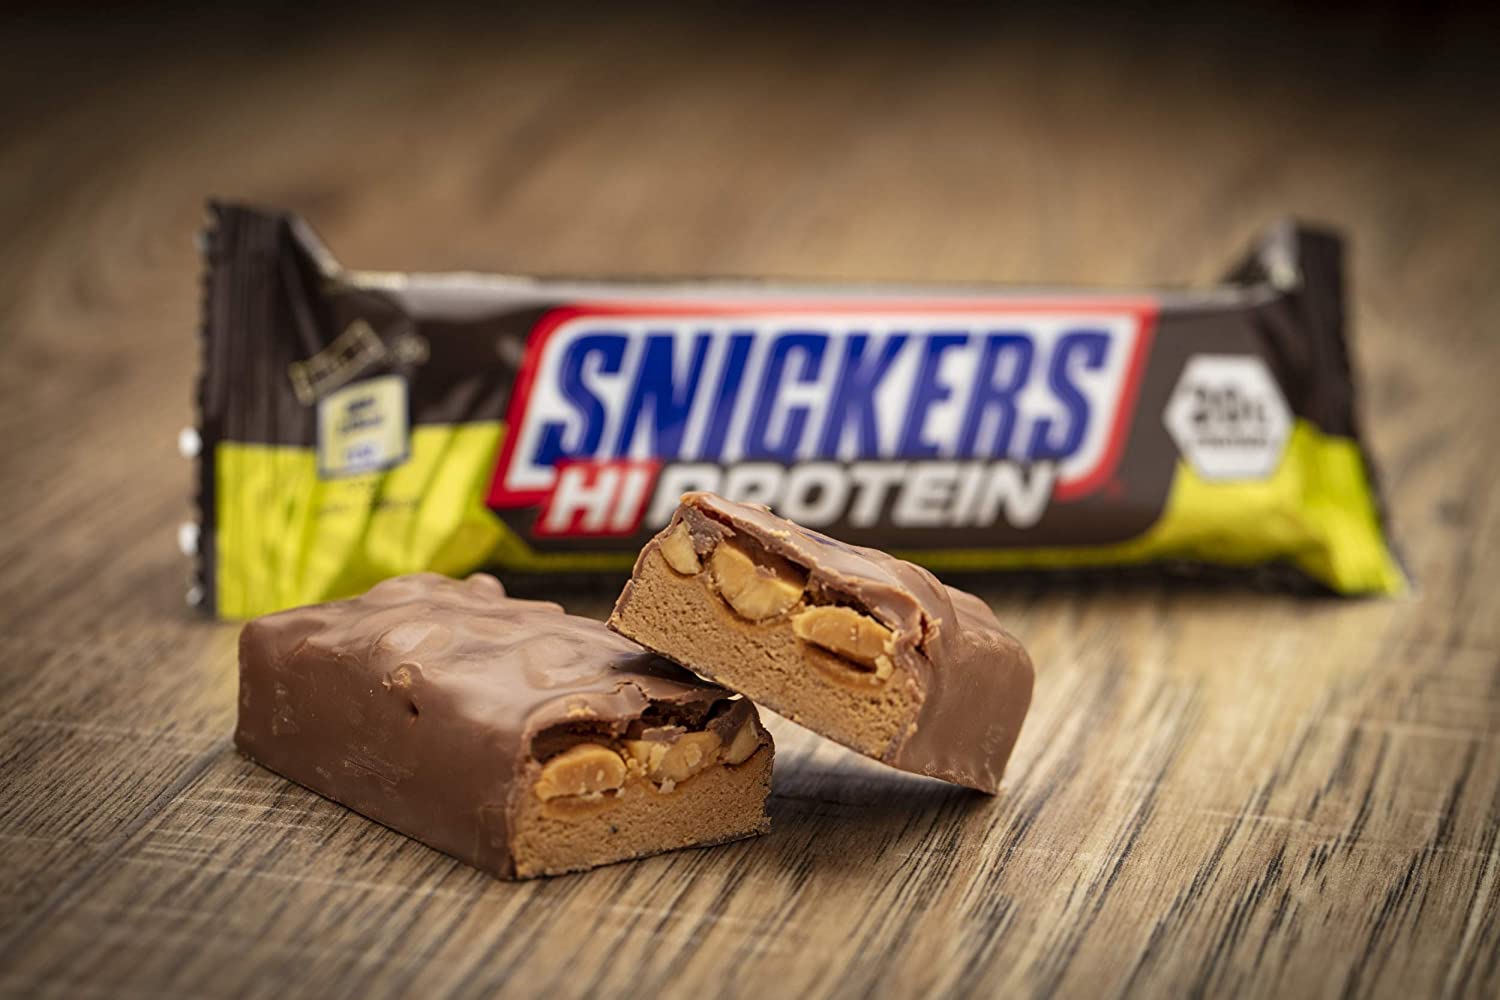 Snickers Hi Protein Bar 20g protein - Barretta Proteica Snickers cioccolato protein protein bar proteine snickers